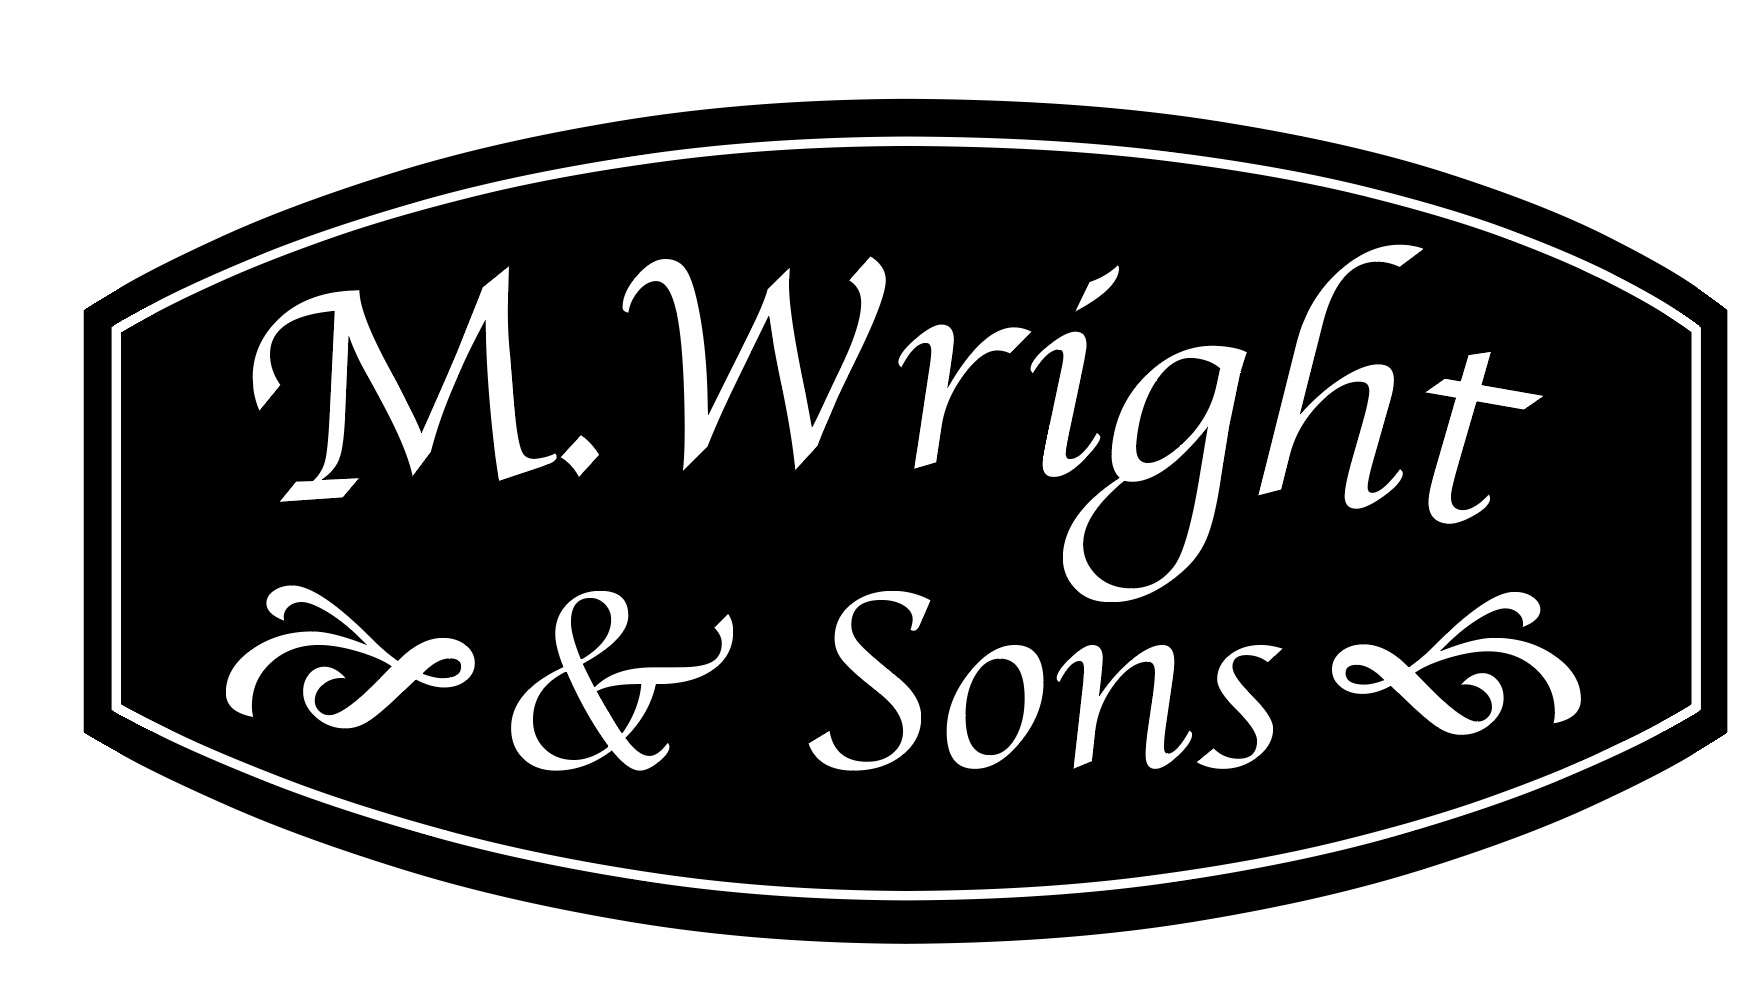 M.Wright & sons